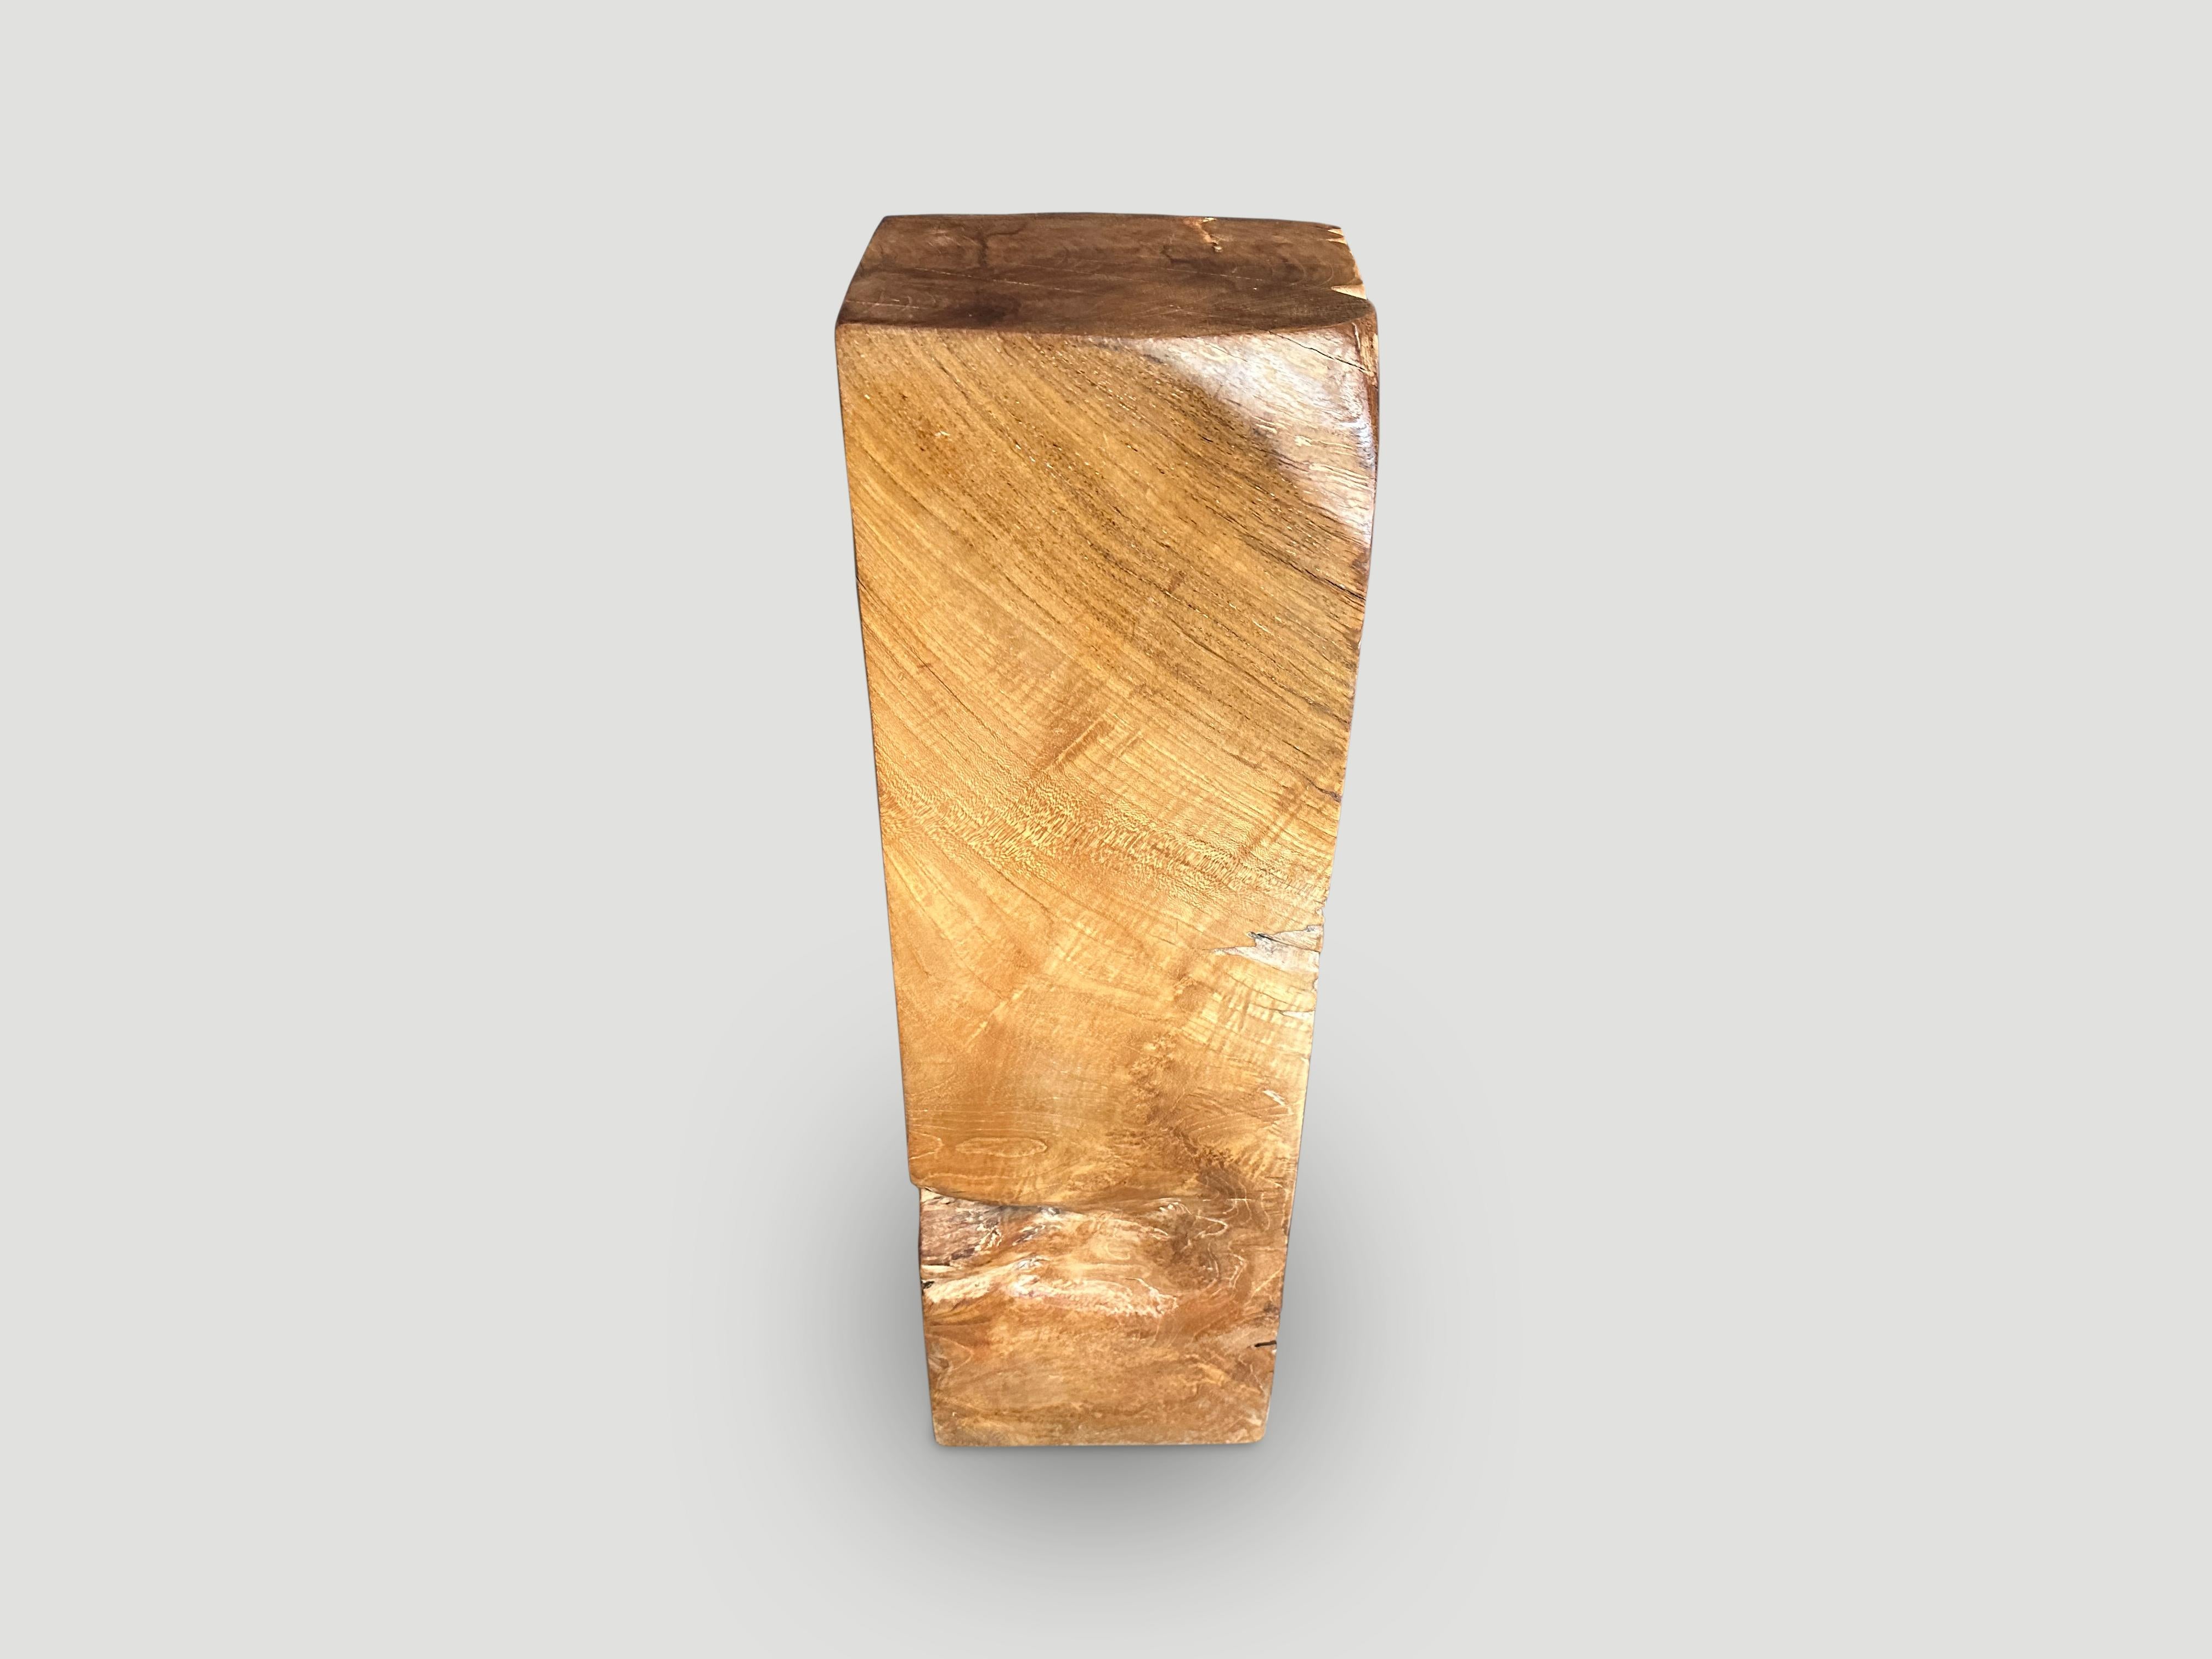 Reclaimed teak wood pedestal or side table hand carved into this usable shape whilst respecting the organic wood. Polished with a natural oil revealing the beautiful wood grain and textures. Both usable and sculptural.

This side table or pedestal